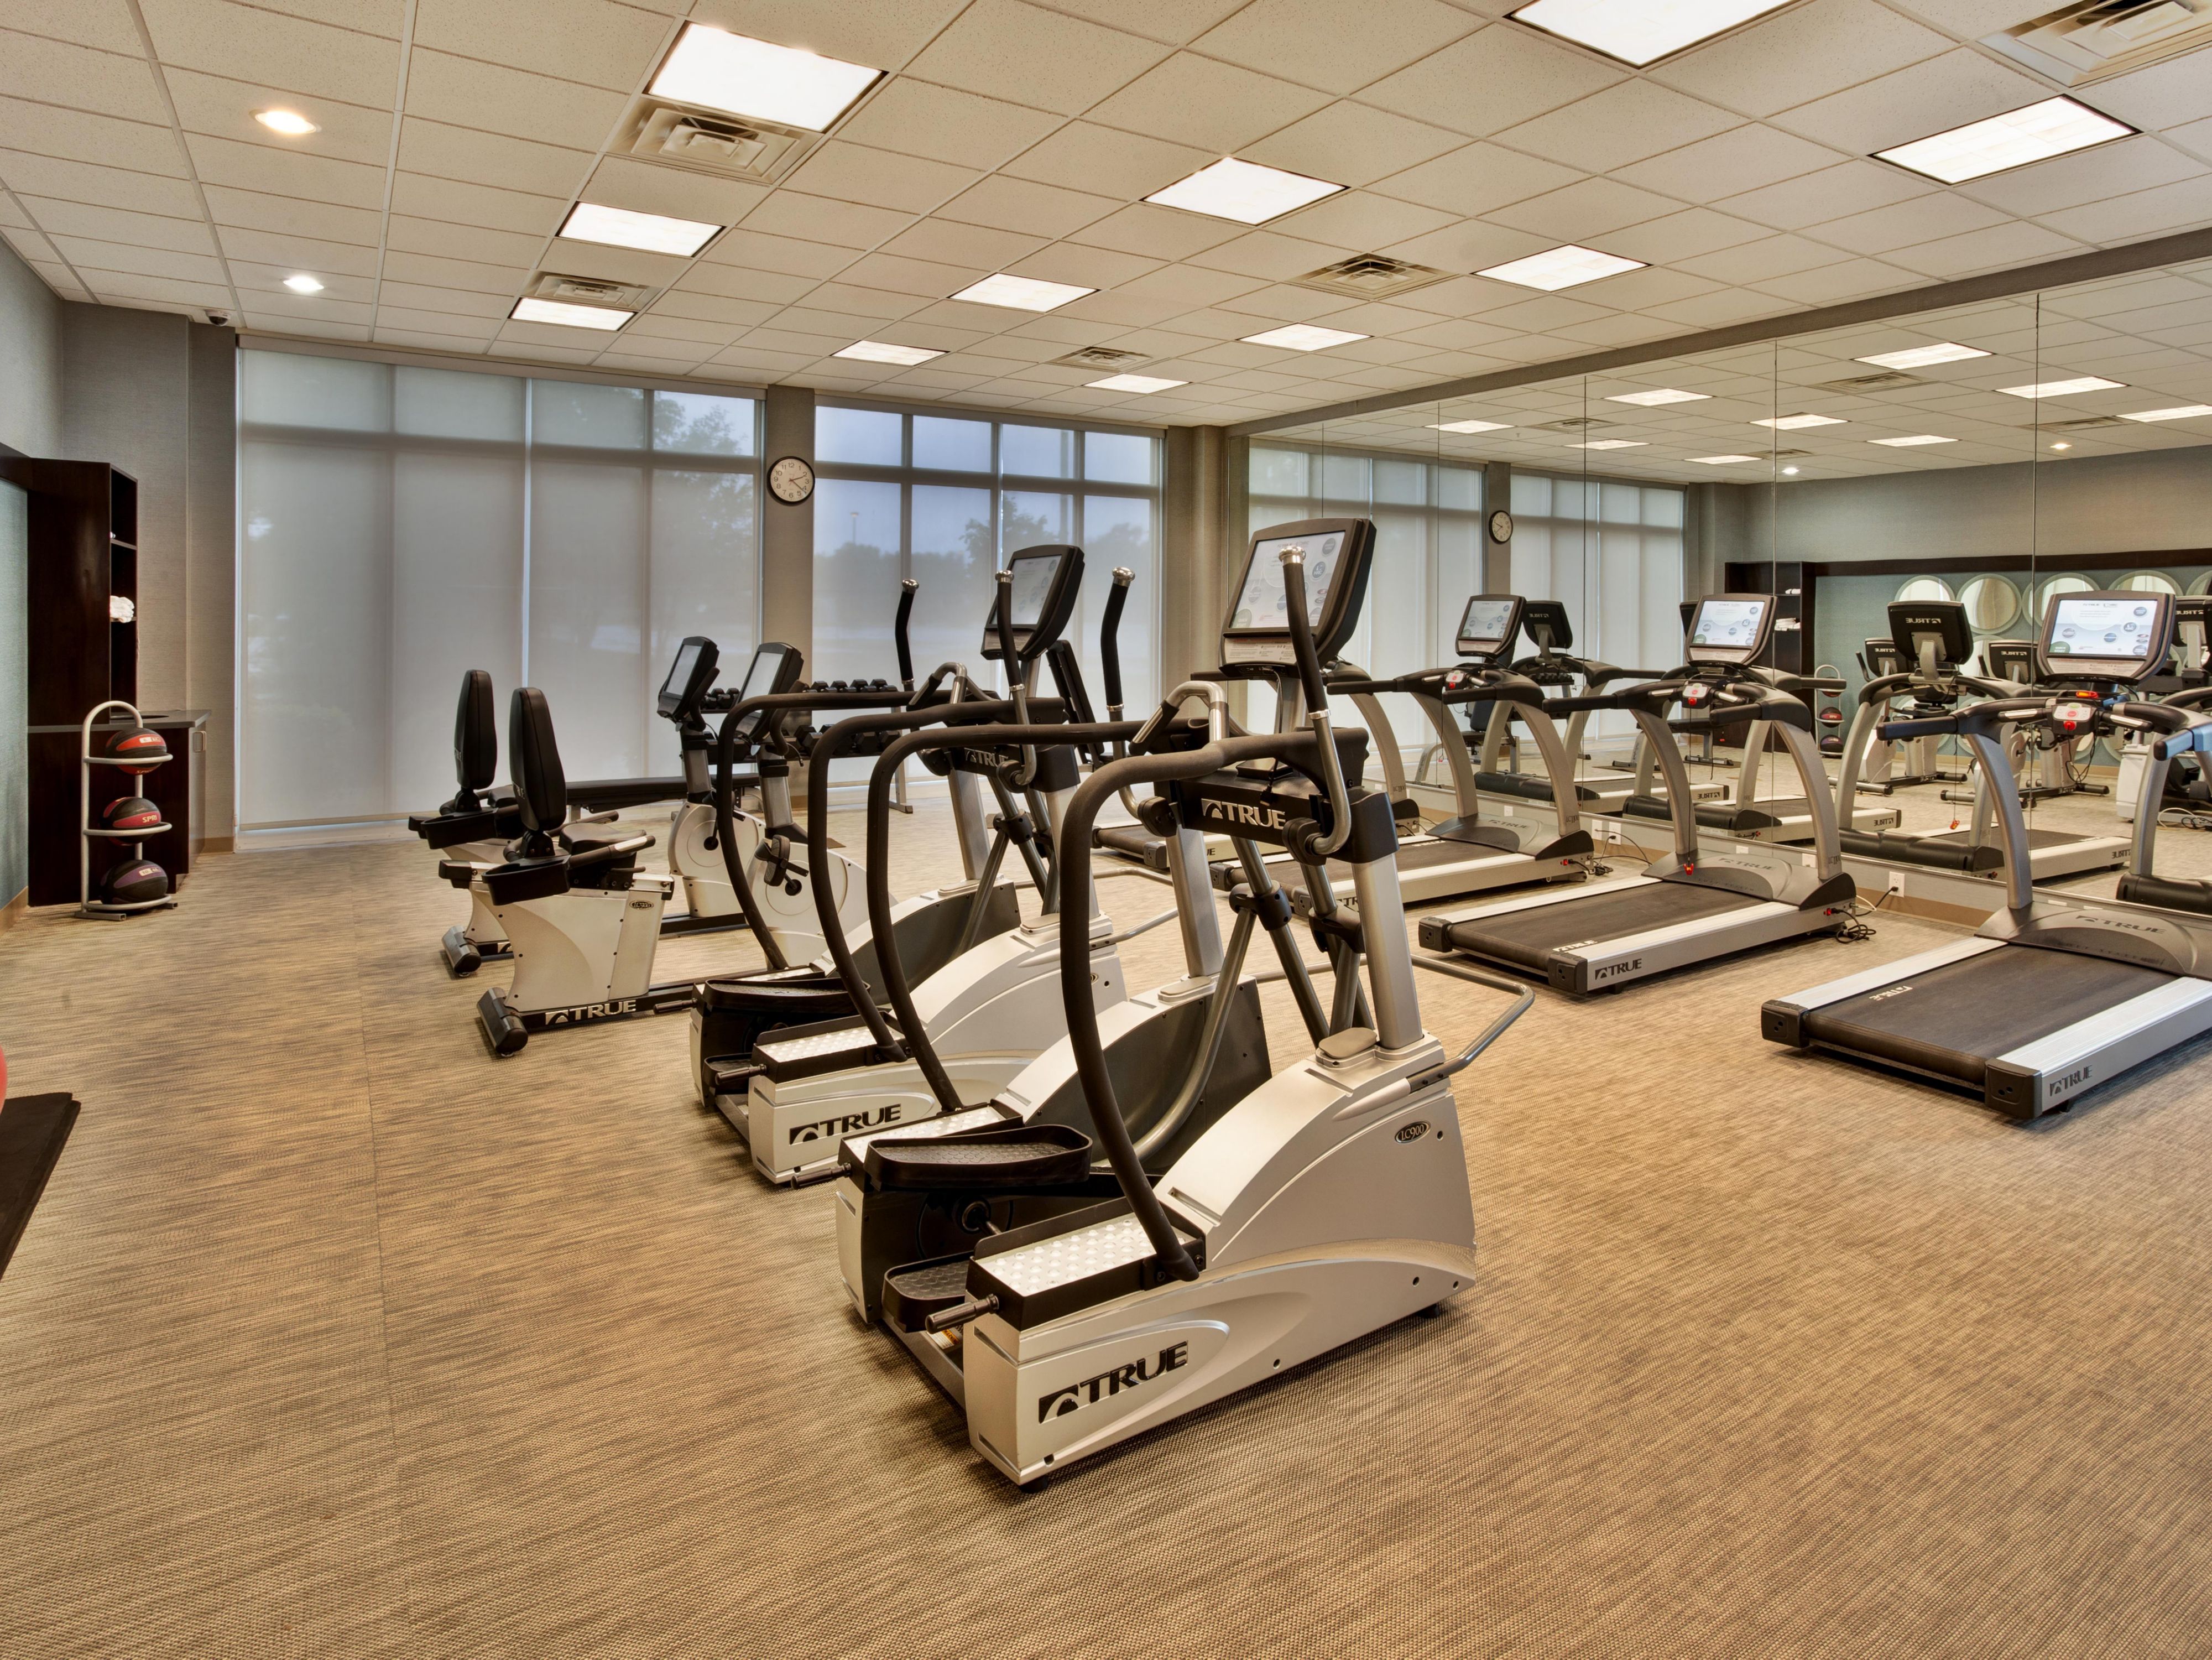 Relax and unwind at our indoor pool with friends, family, or your own good company. When it’s time to work out, head on over to our Fitness Center. Challenge yourself with our treadmills, elliptical machines, yoga mats, free weights, medicine balls, and resistance bands.